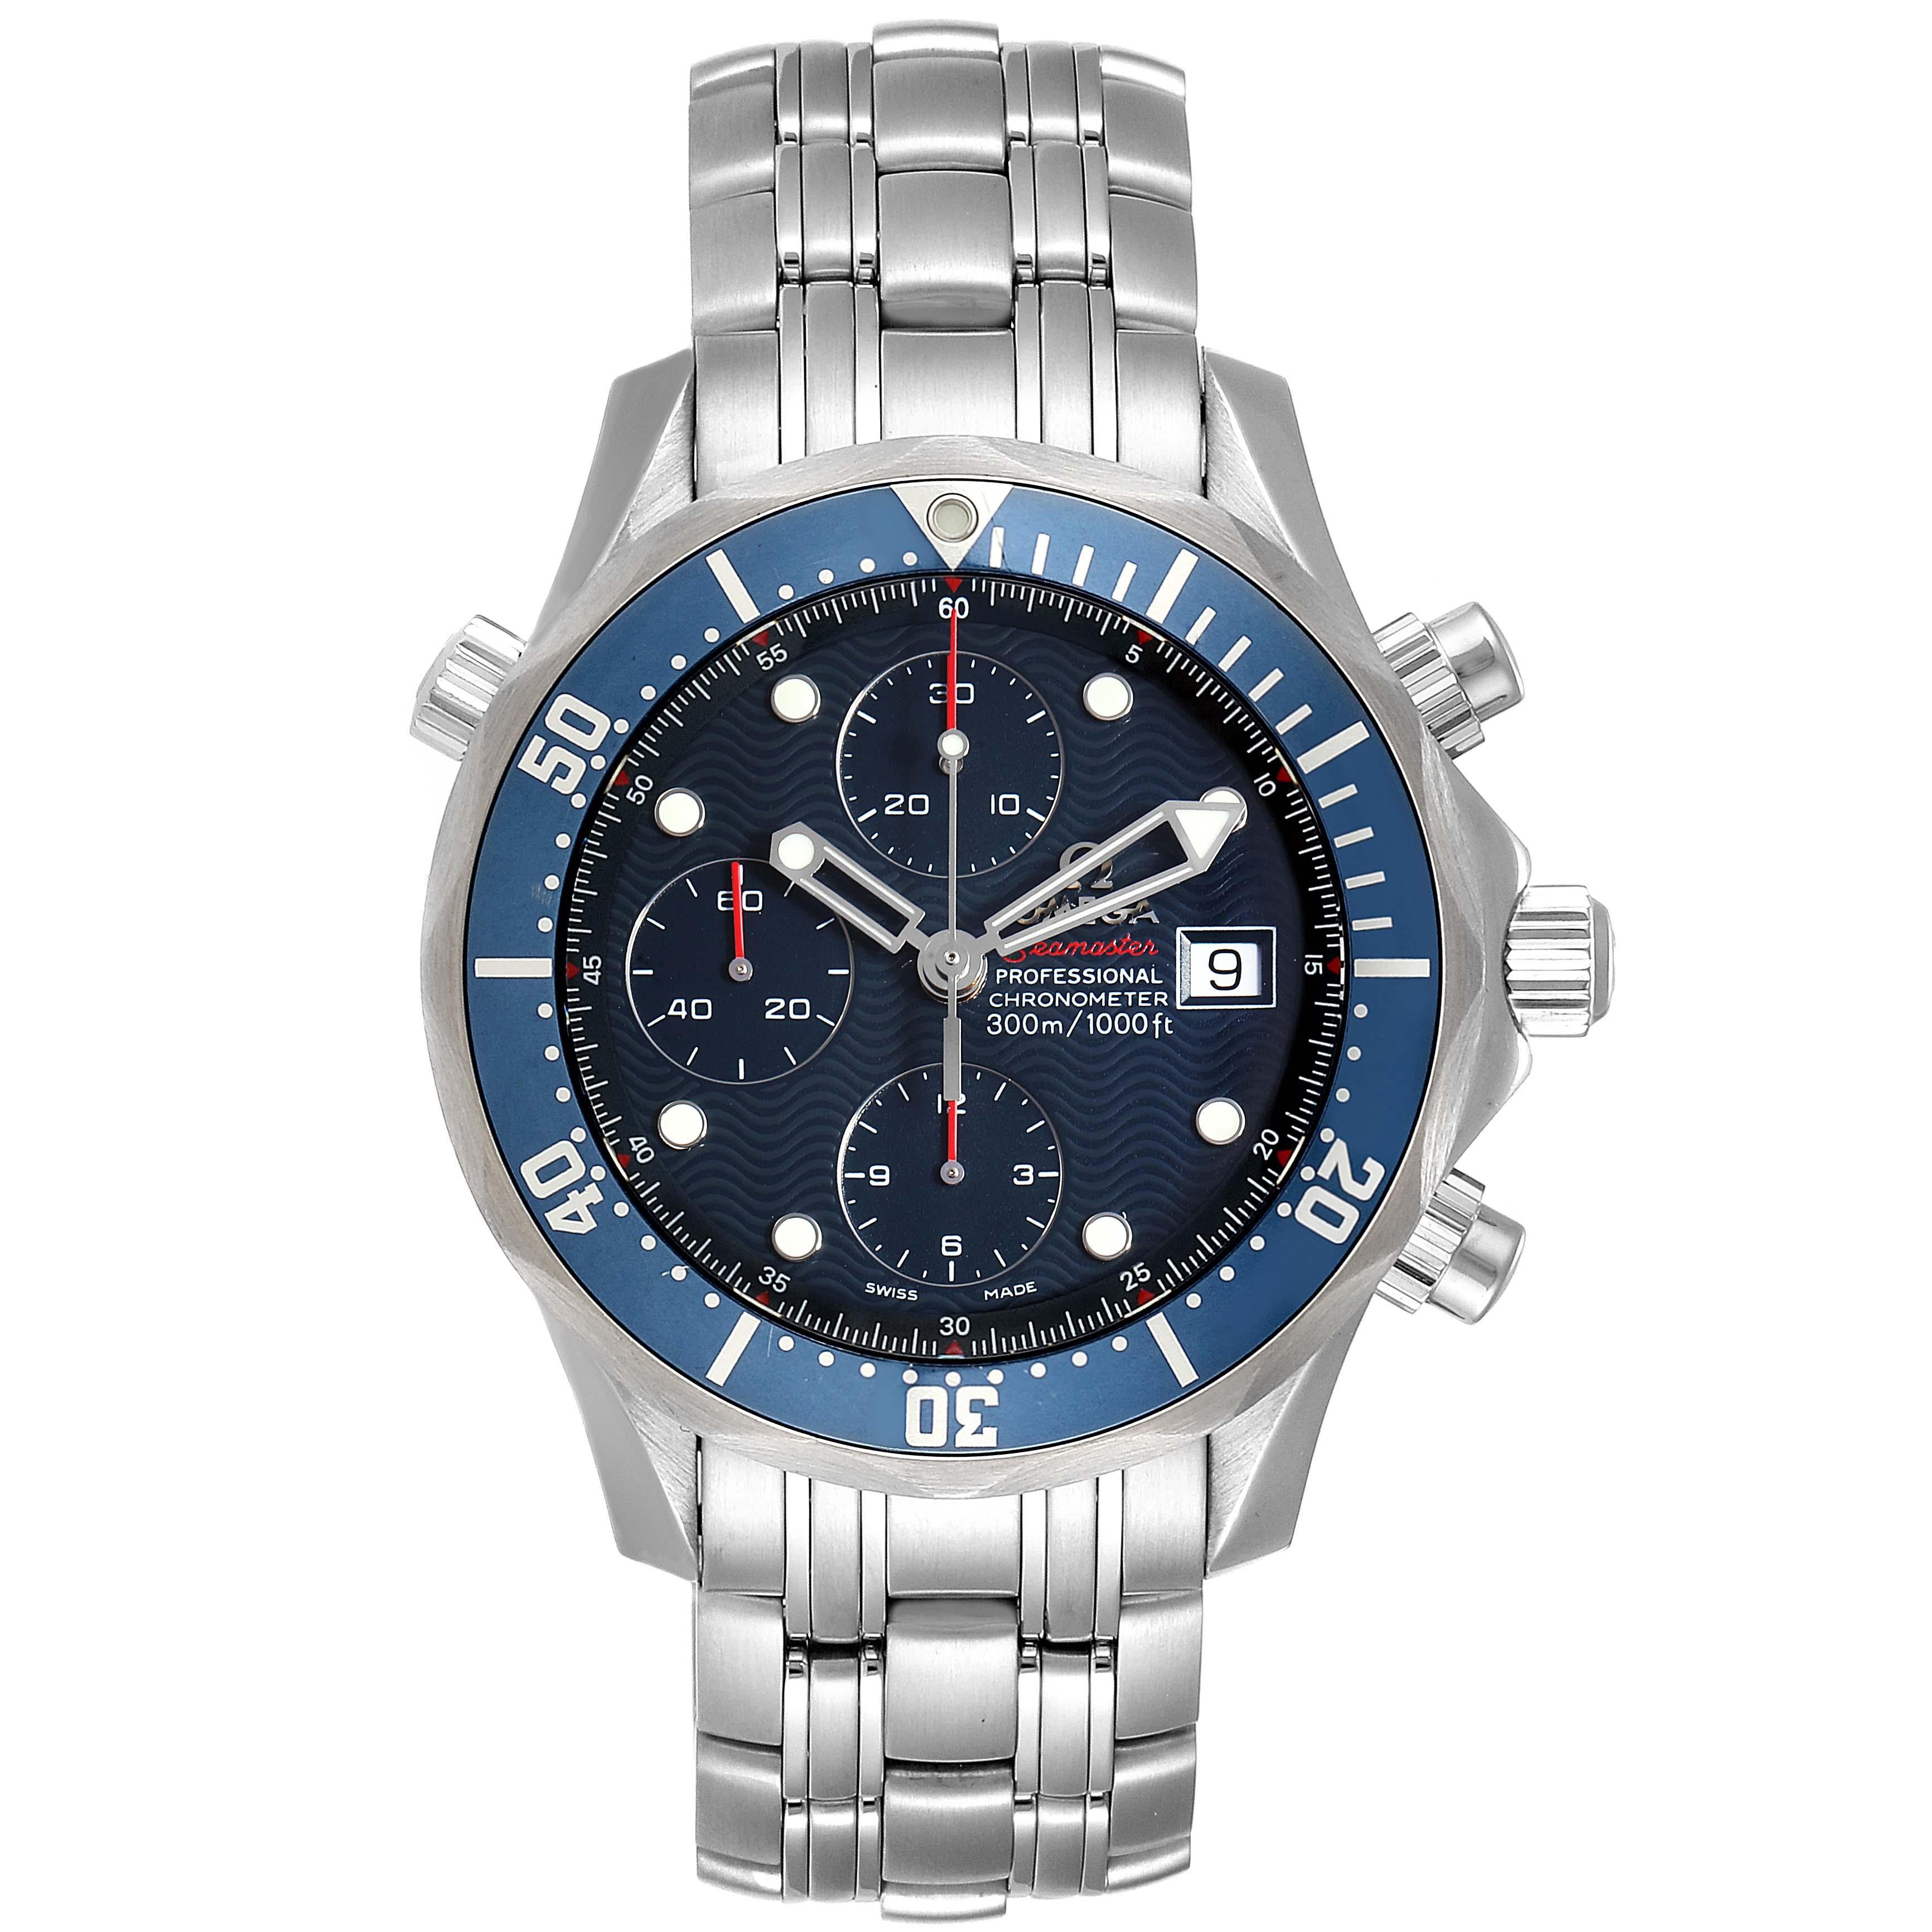 Omega Seamaster 300 Chronograph 41.5 mm Mens Watch 2225.80.00 Box Card. Officially certified chronometer automatic self-winding movement. Chronograph function. Brushed and polished stainless steel case 41.5 mm in diameter. Omega logo on a crown.